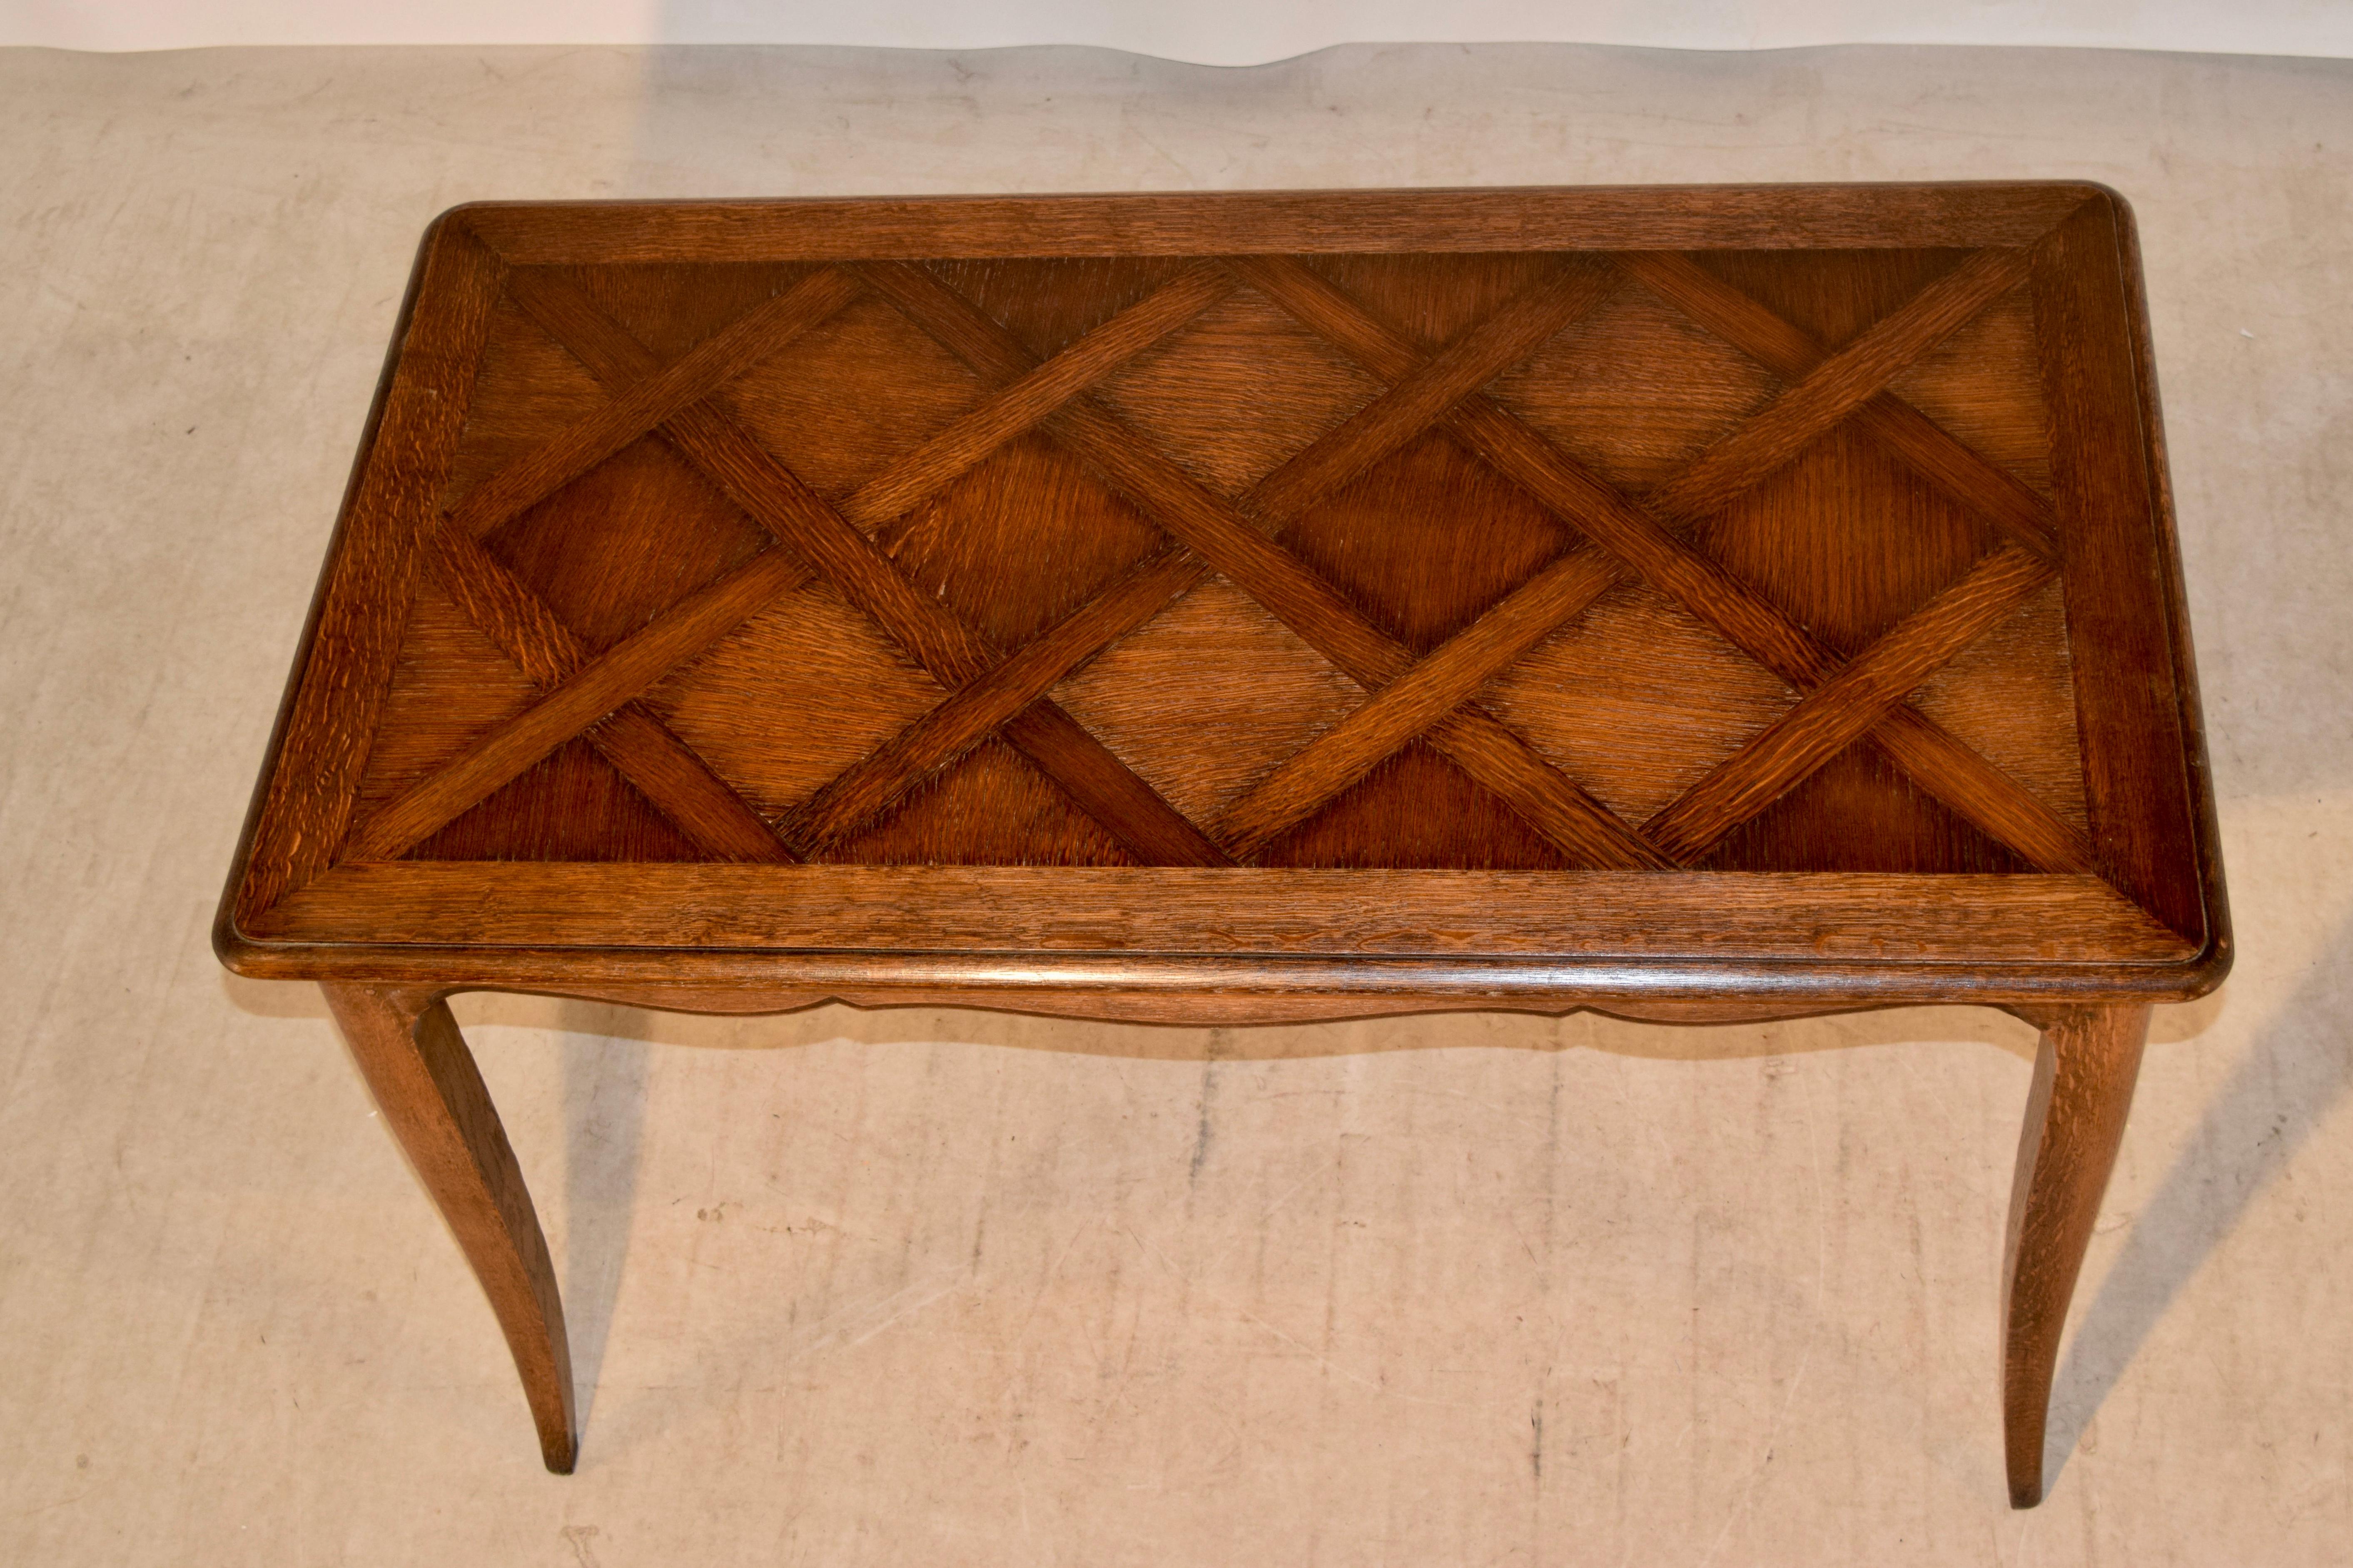 Late 19th Century Table with Parquetry Top (19. Jahrhundert)